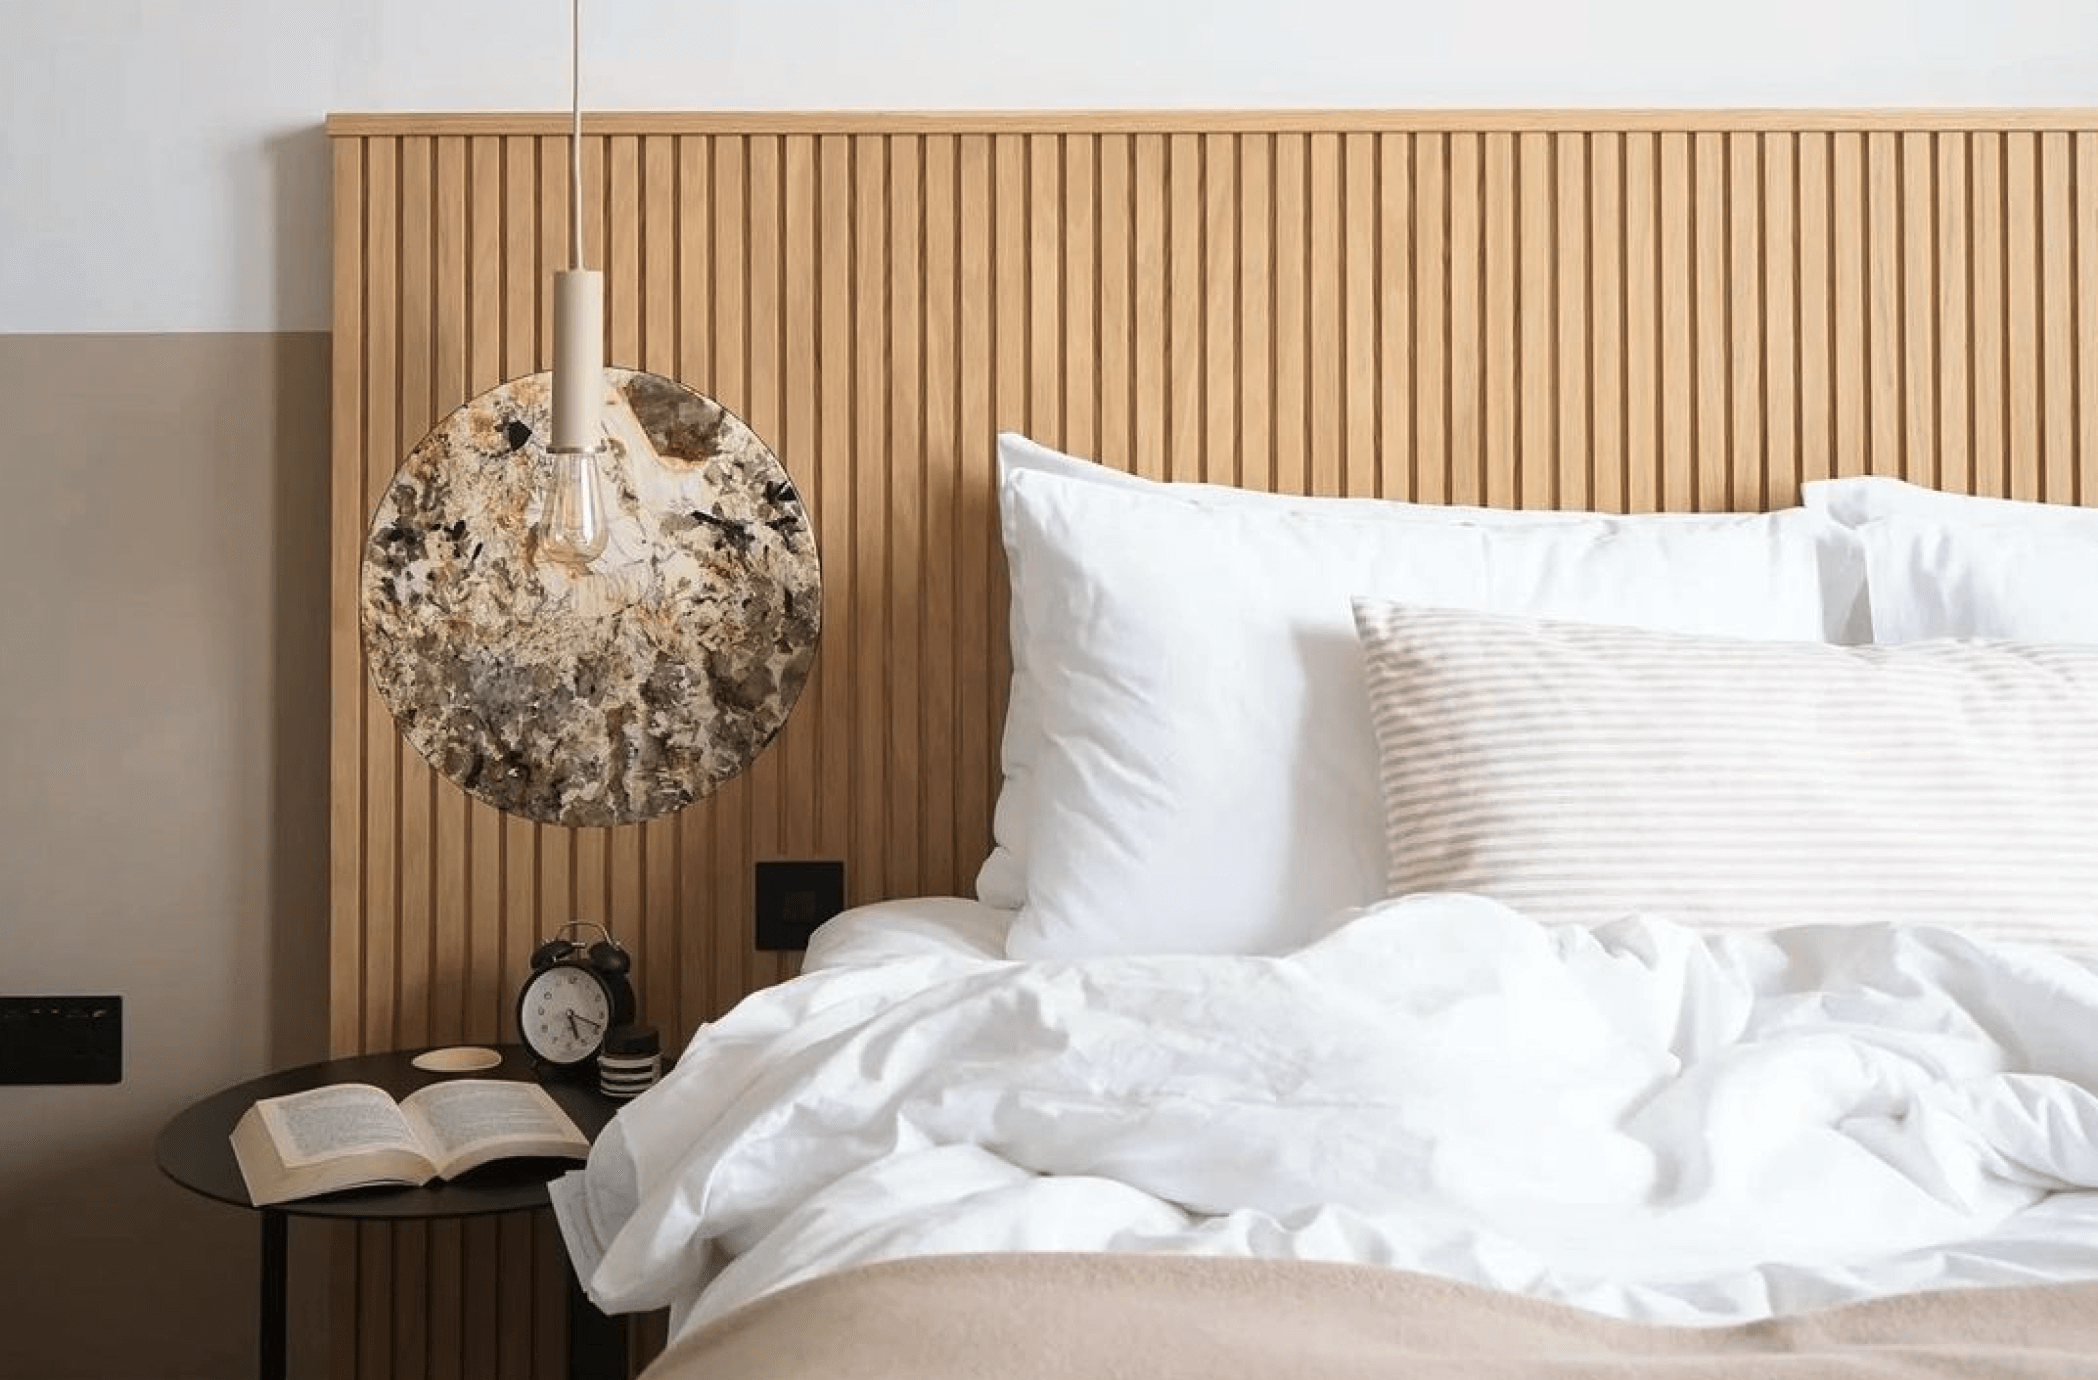 Find Comfort in the Best Comforters: A Lesson in Bedding from FluffCo